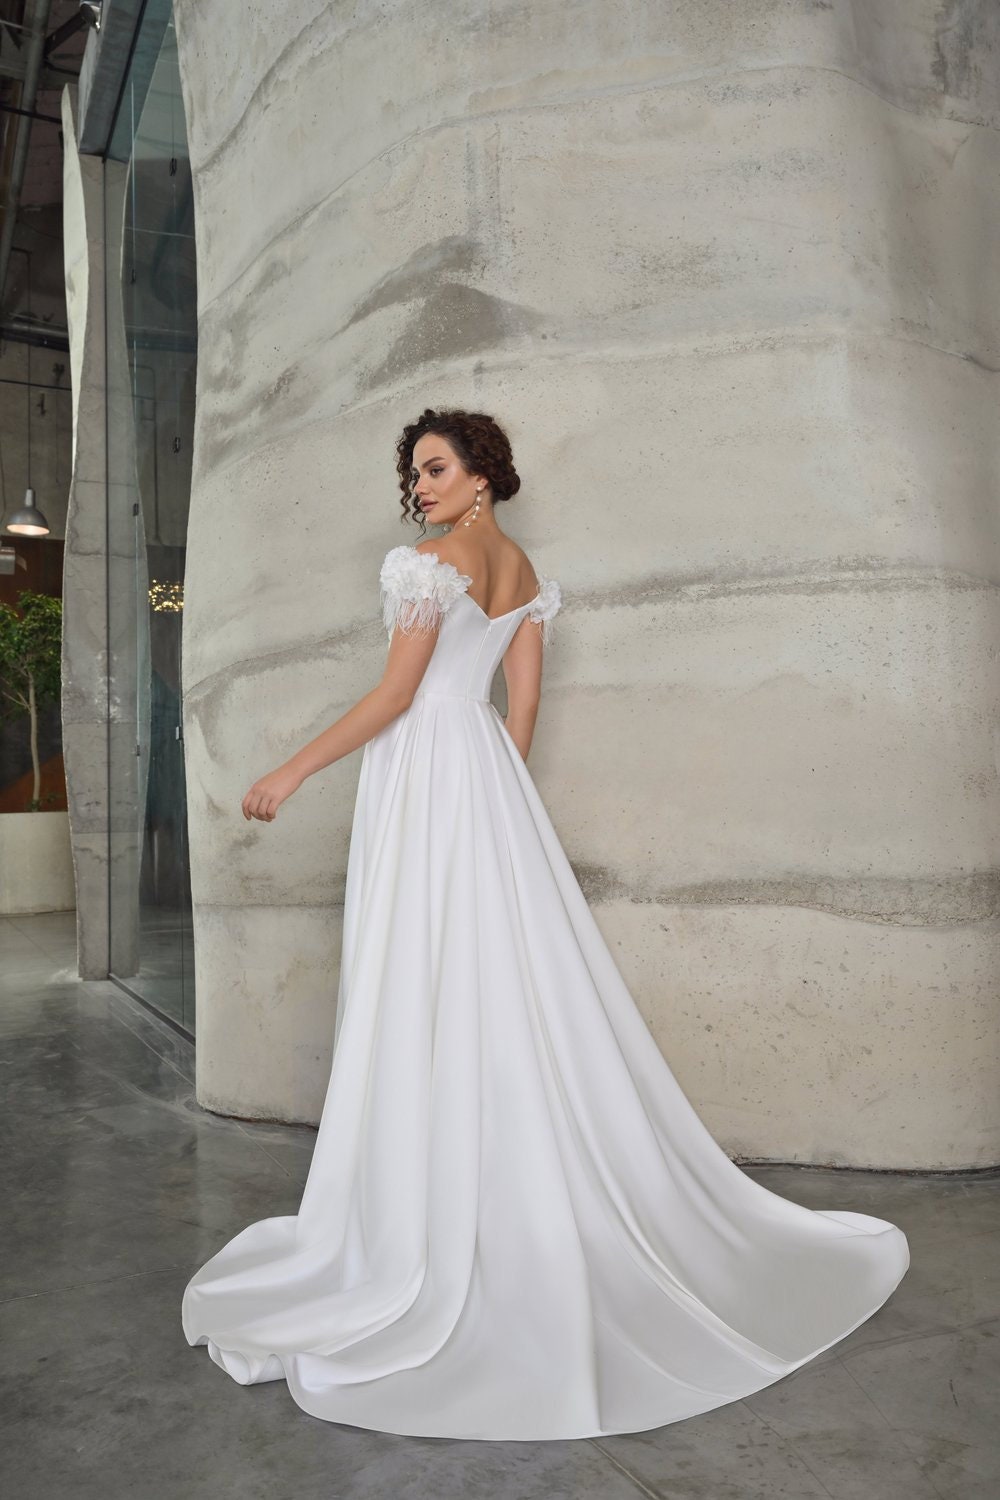 Minimalist Simple Off the Shoulder 3D Flowers Wedding Dress Bridal Gown Aline with Train Classic Design Side Slit Gathered Waist Flattering